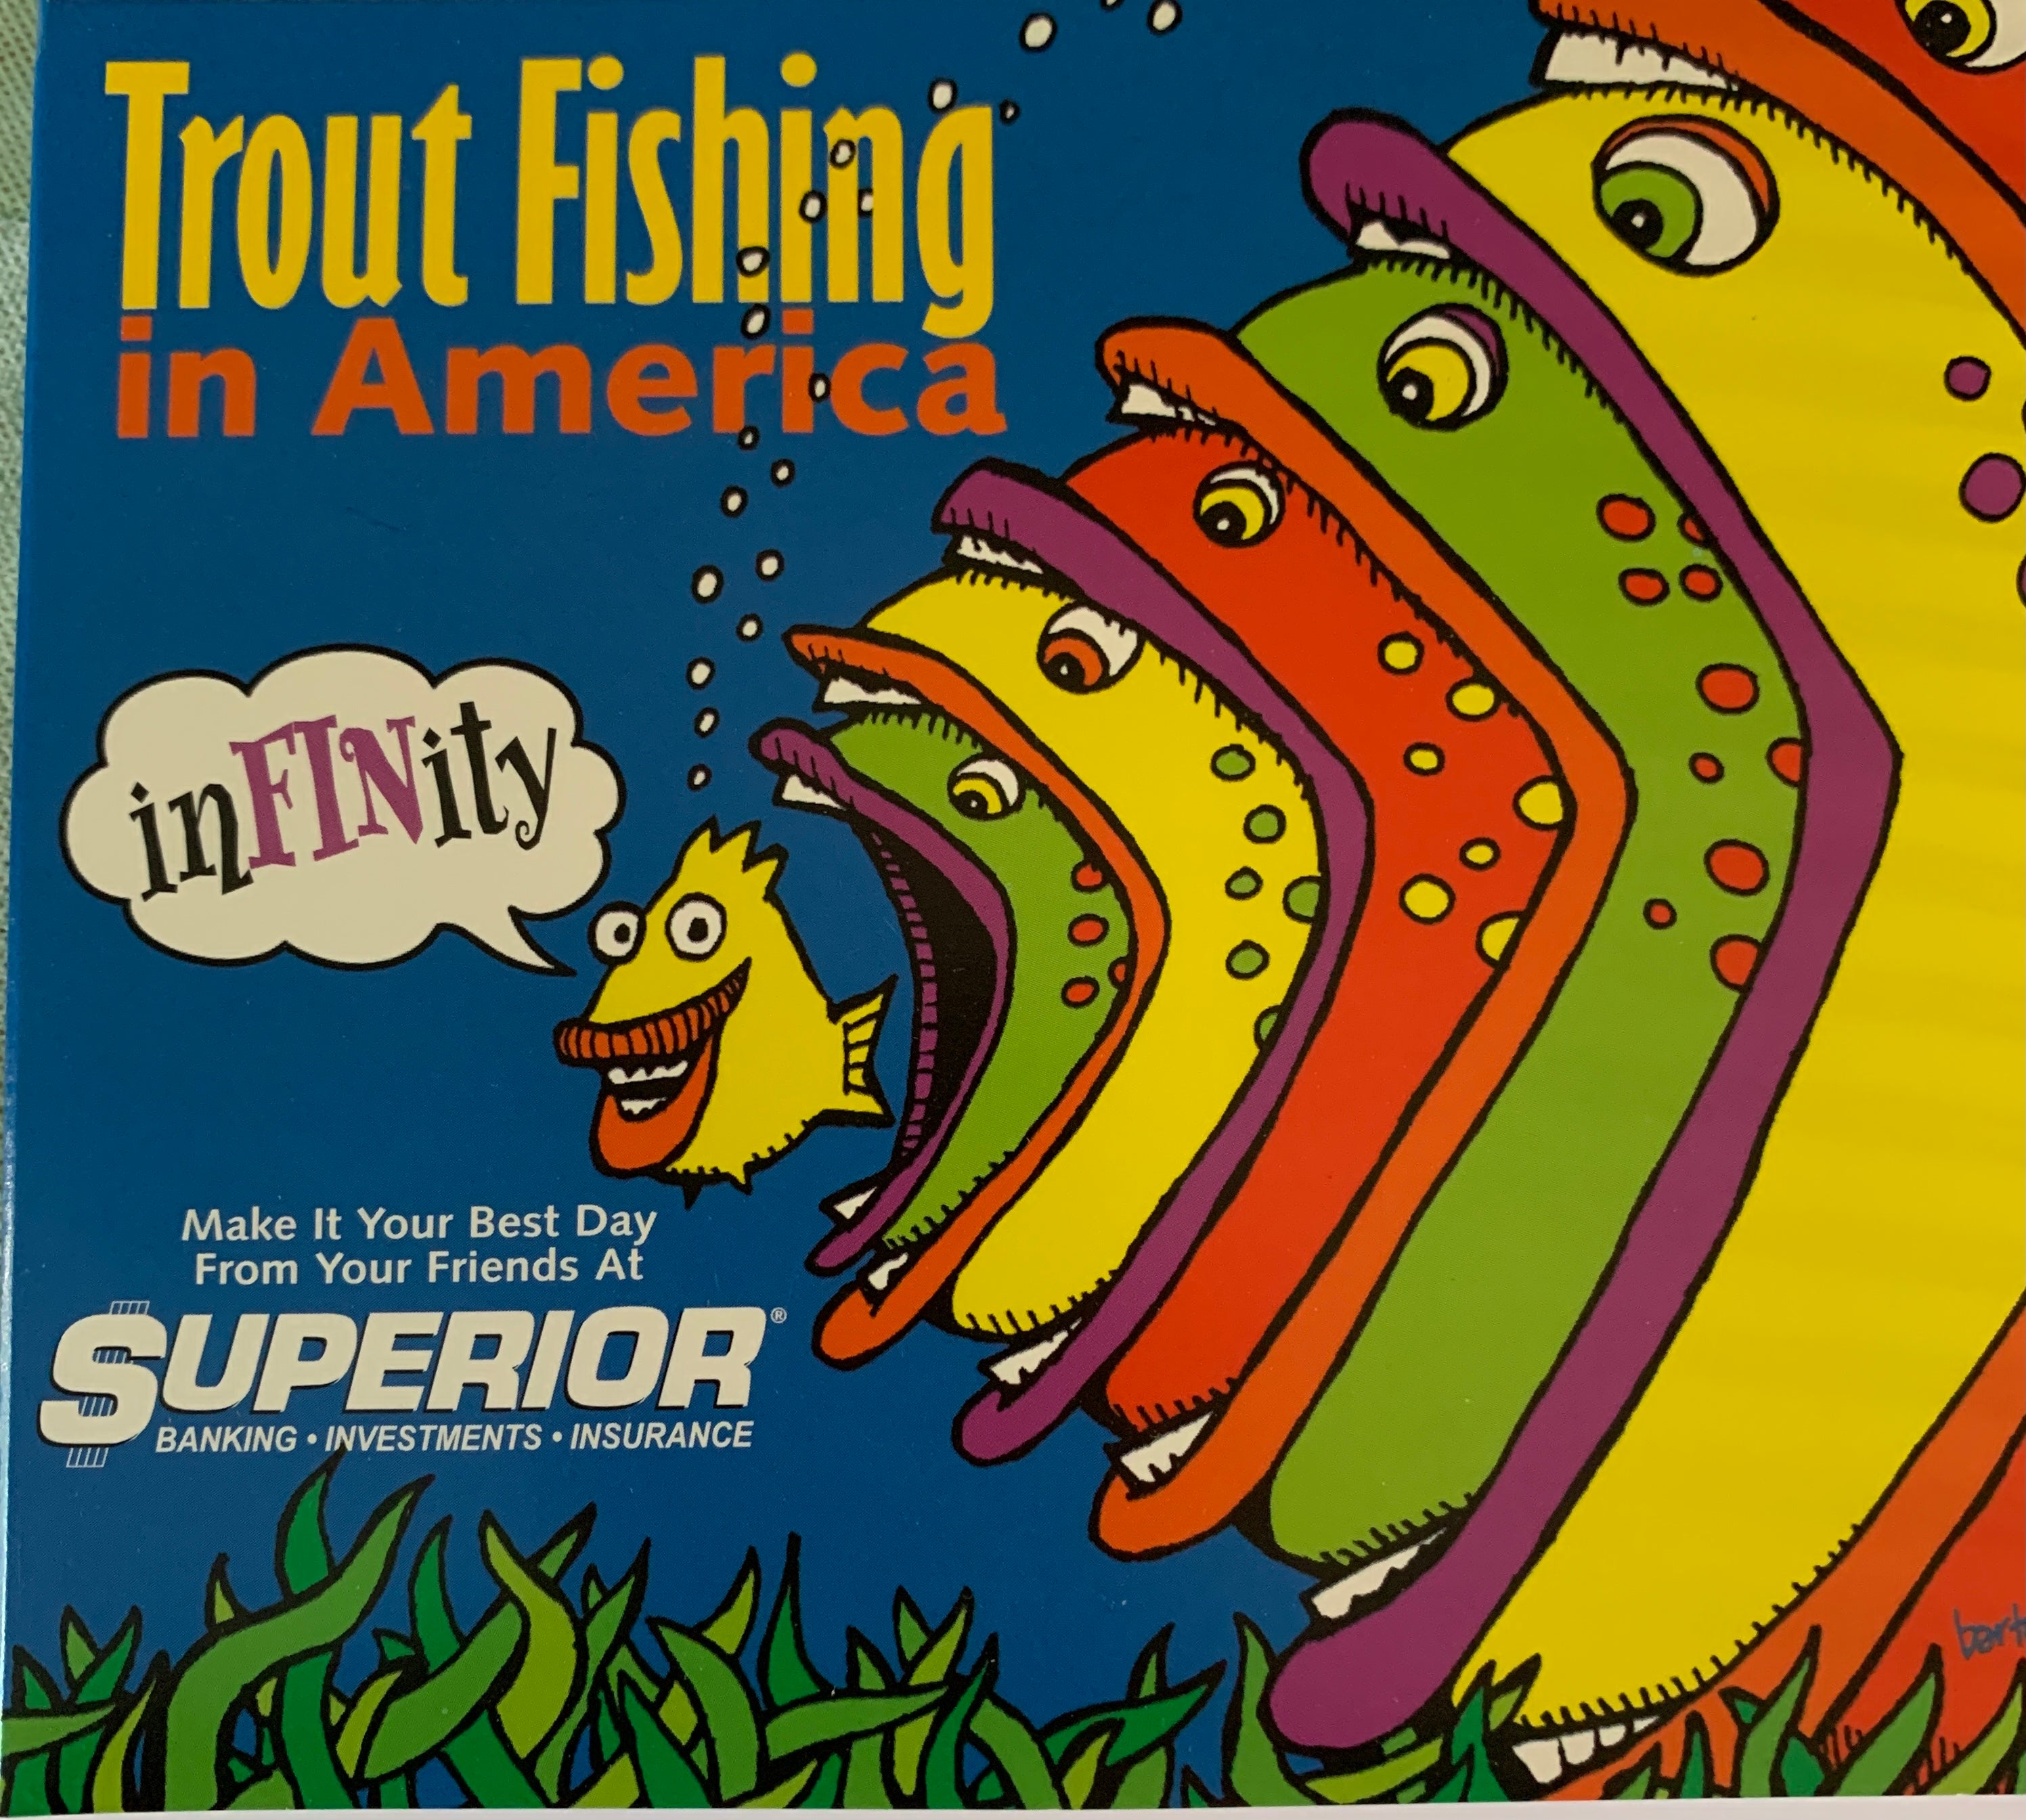 The New American Trout Fishing